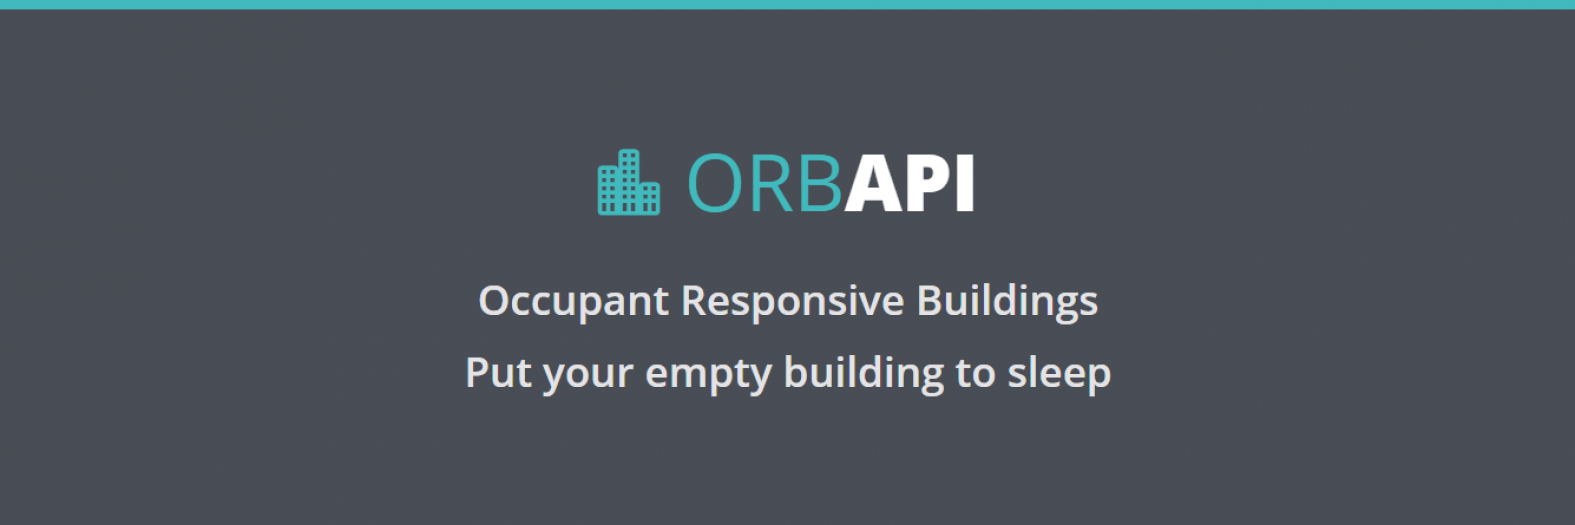 Occupant Responsive Buildings Put your empty building to sleep